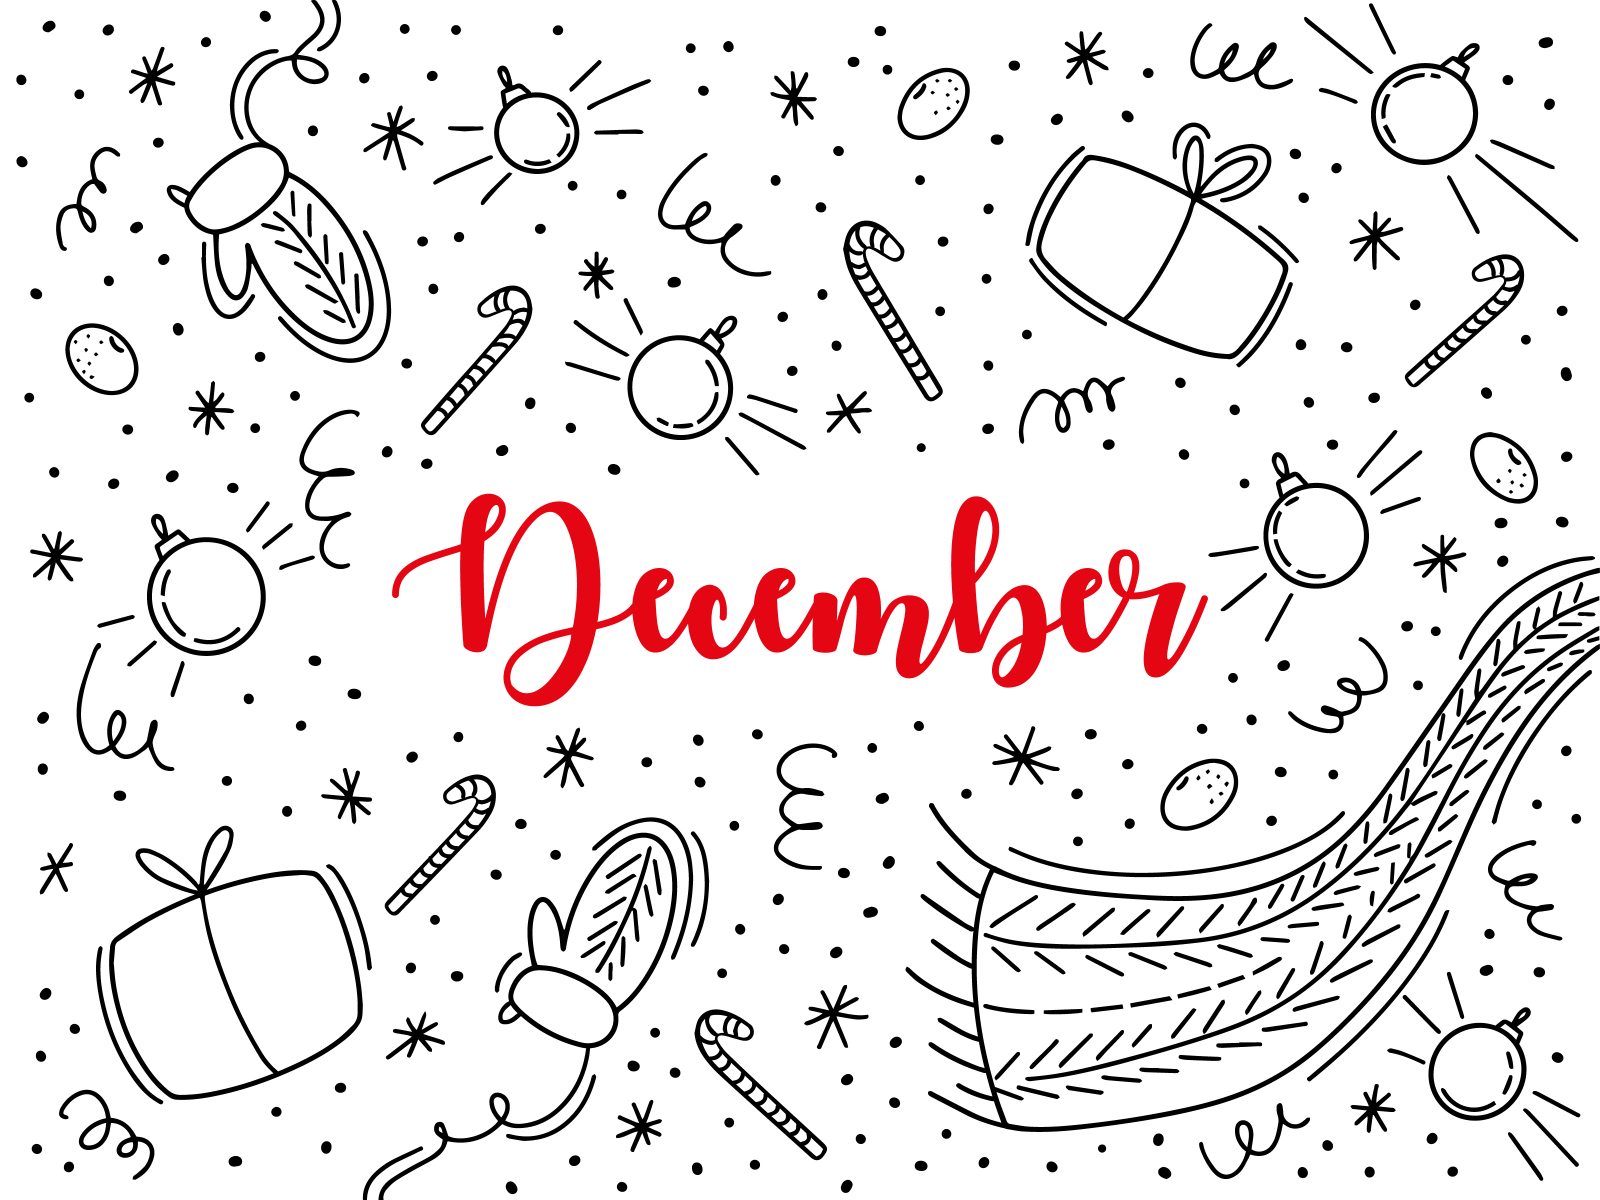 December vector doodle style illustration by Business_Corn Valentina